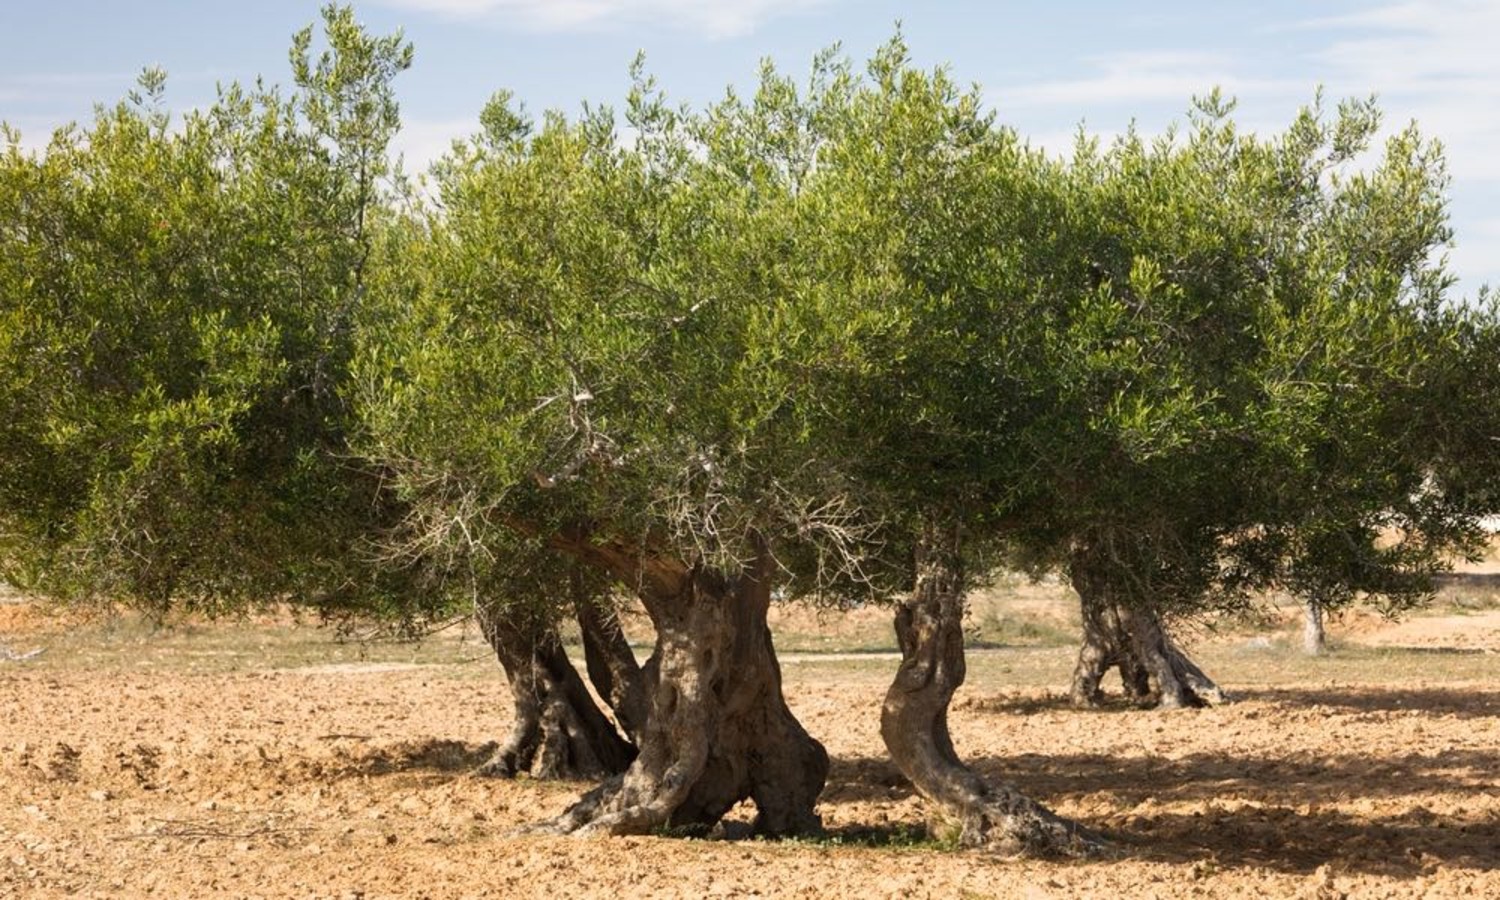 Olives in the Desert: Egypt’s Farmers Call On Scientists to Value Local Know-How